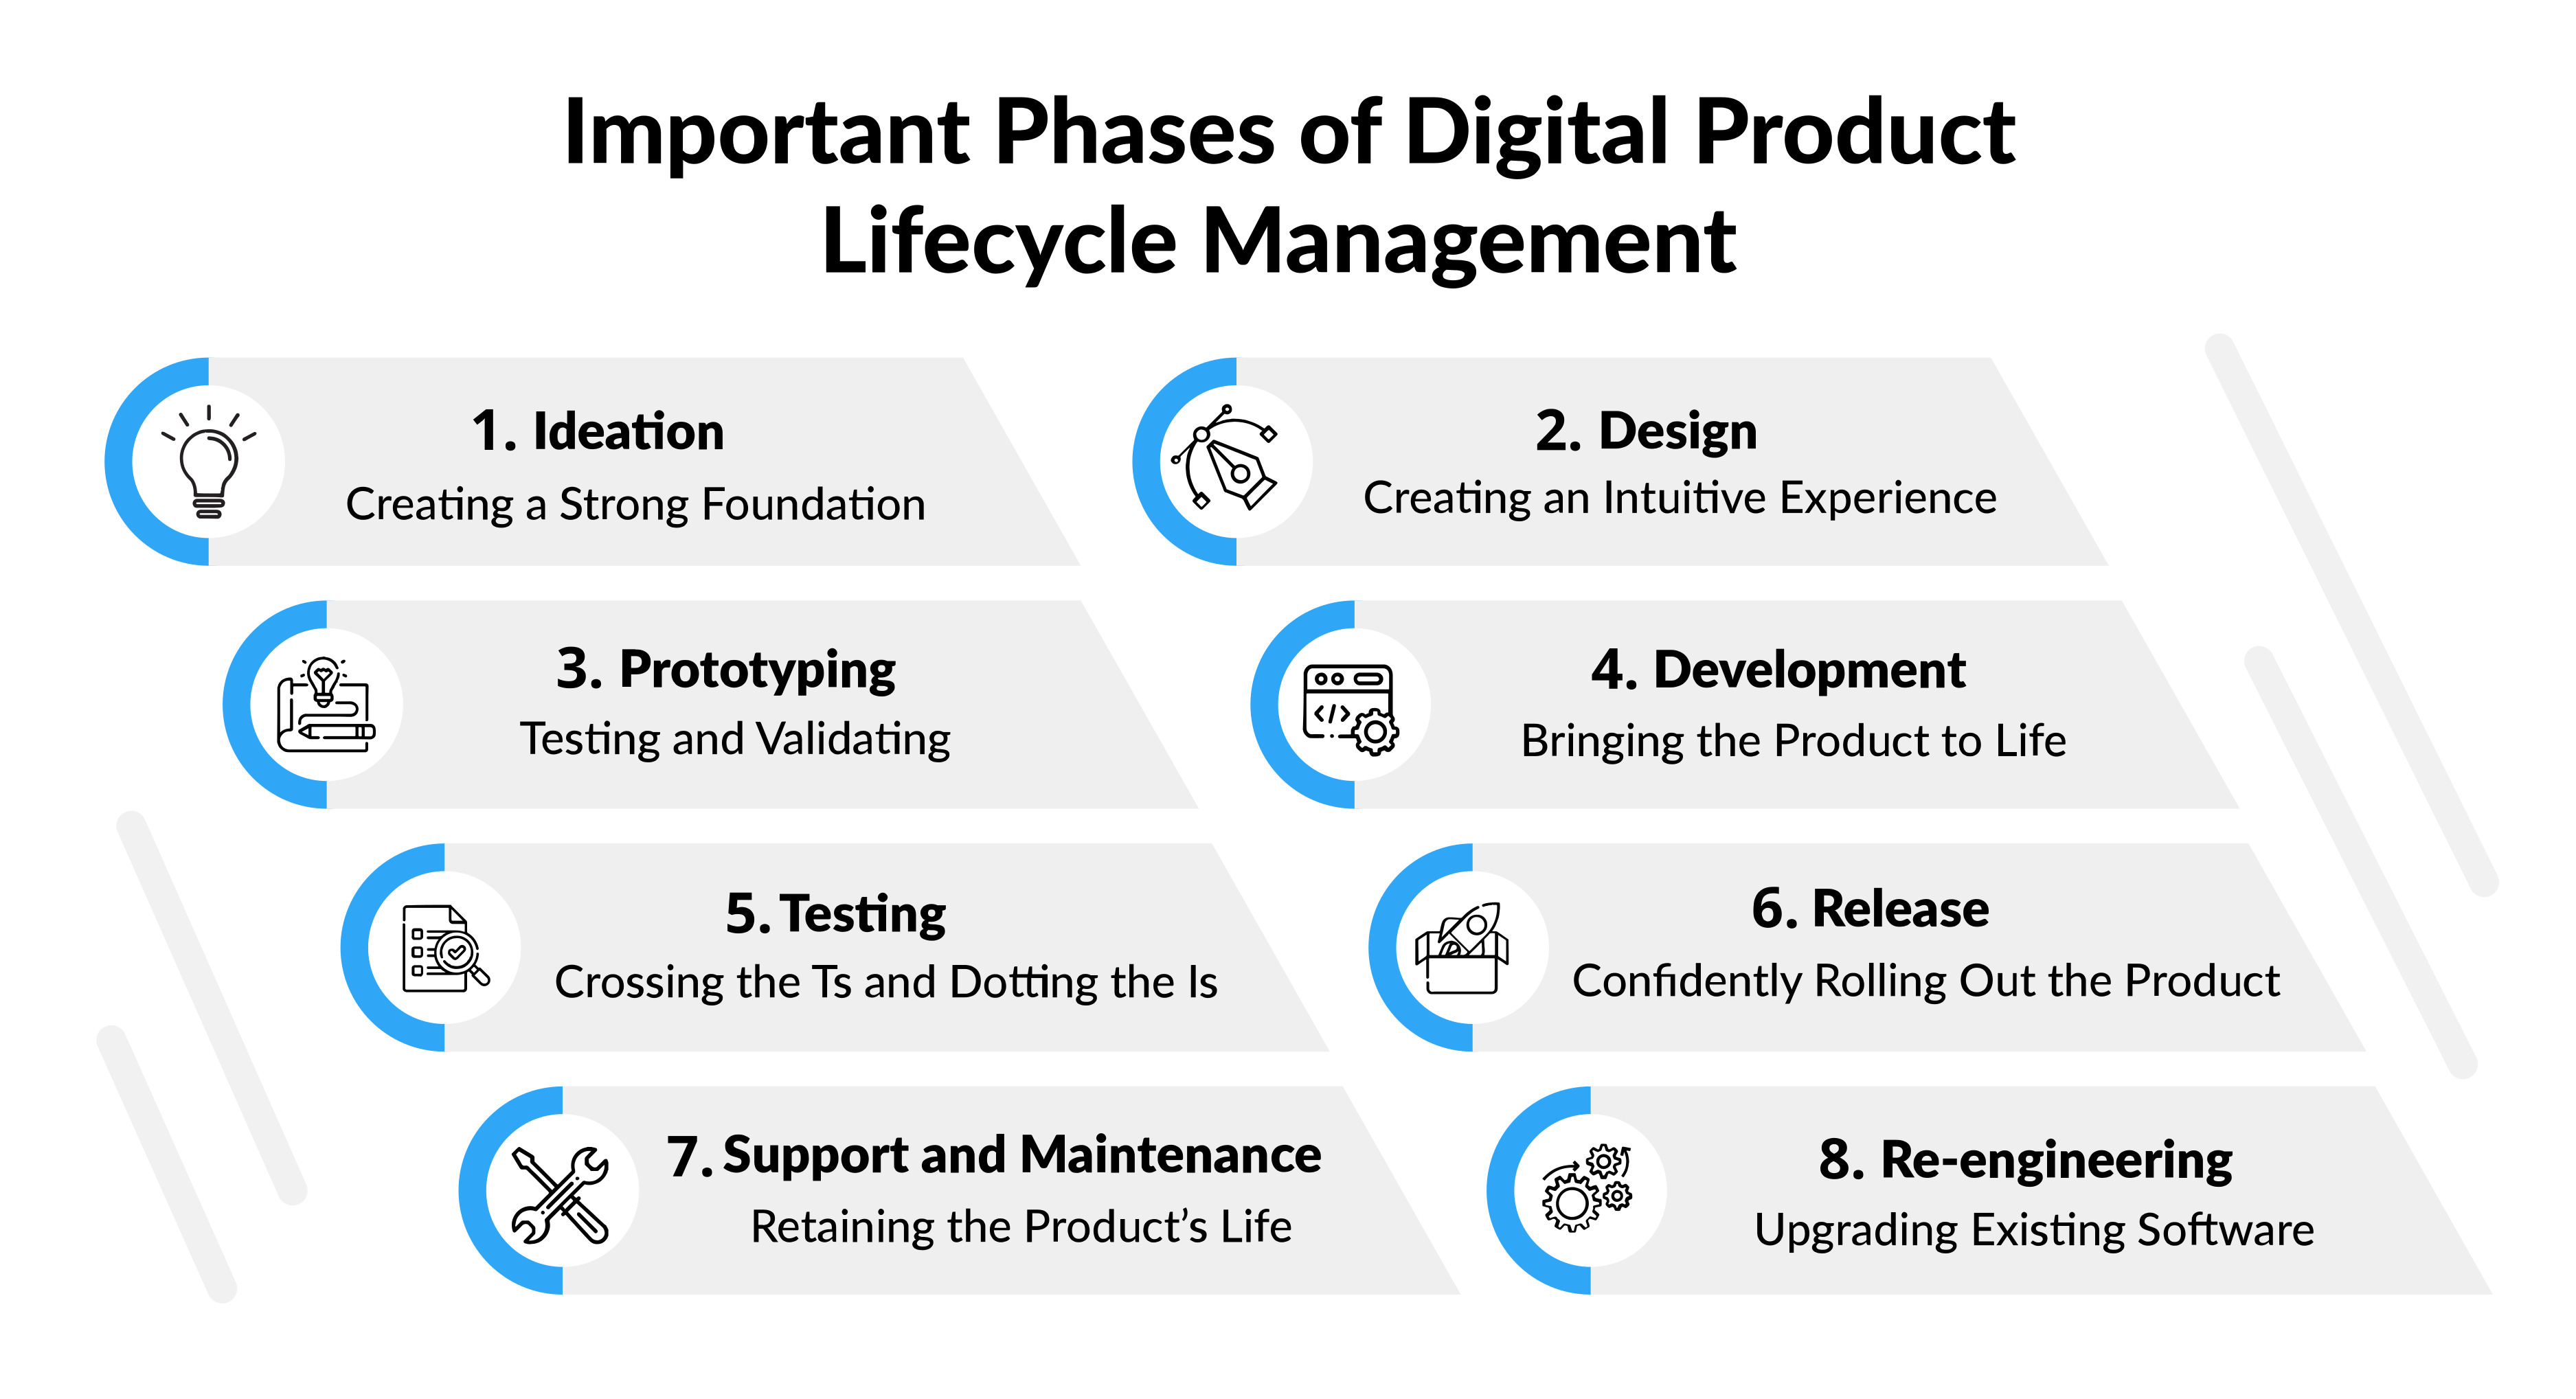 What Does Digital Product Lifecycle Management Look Like?